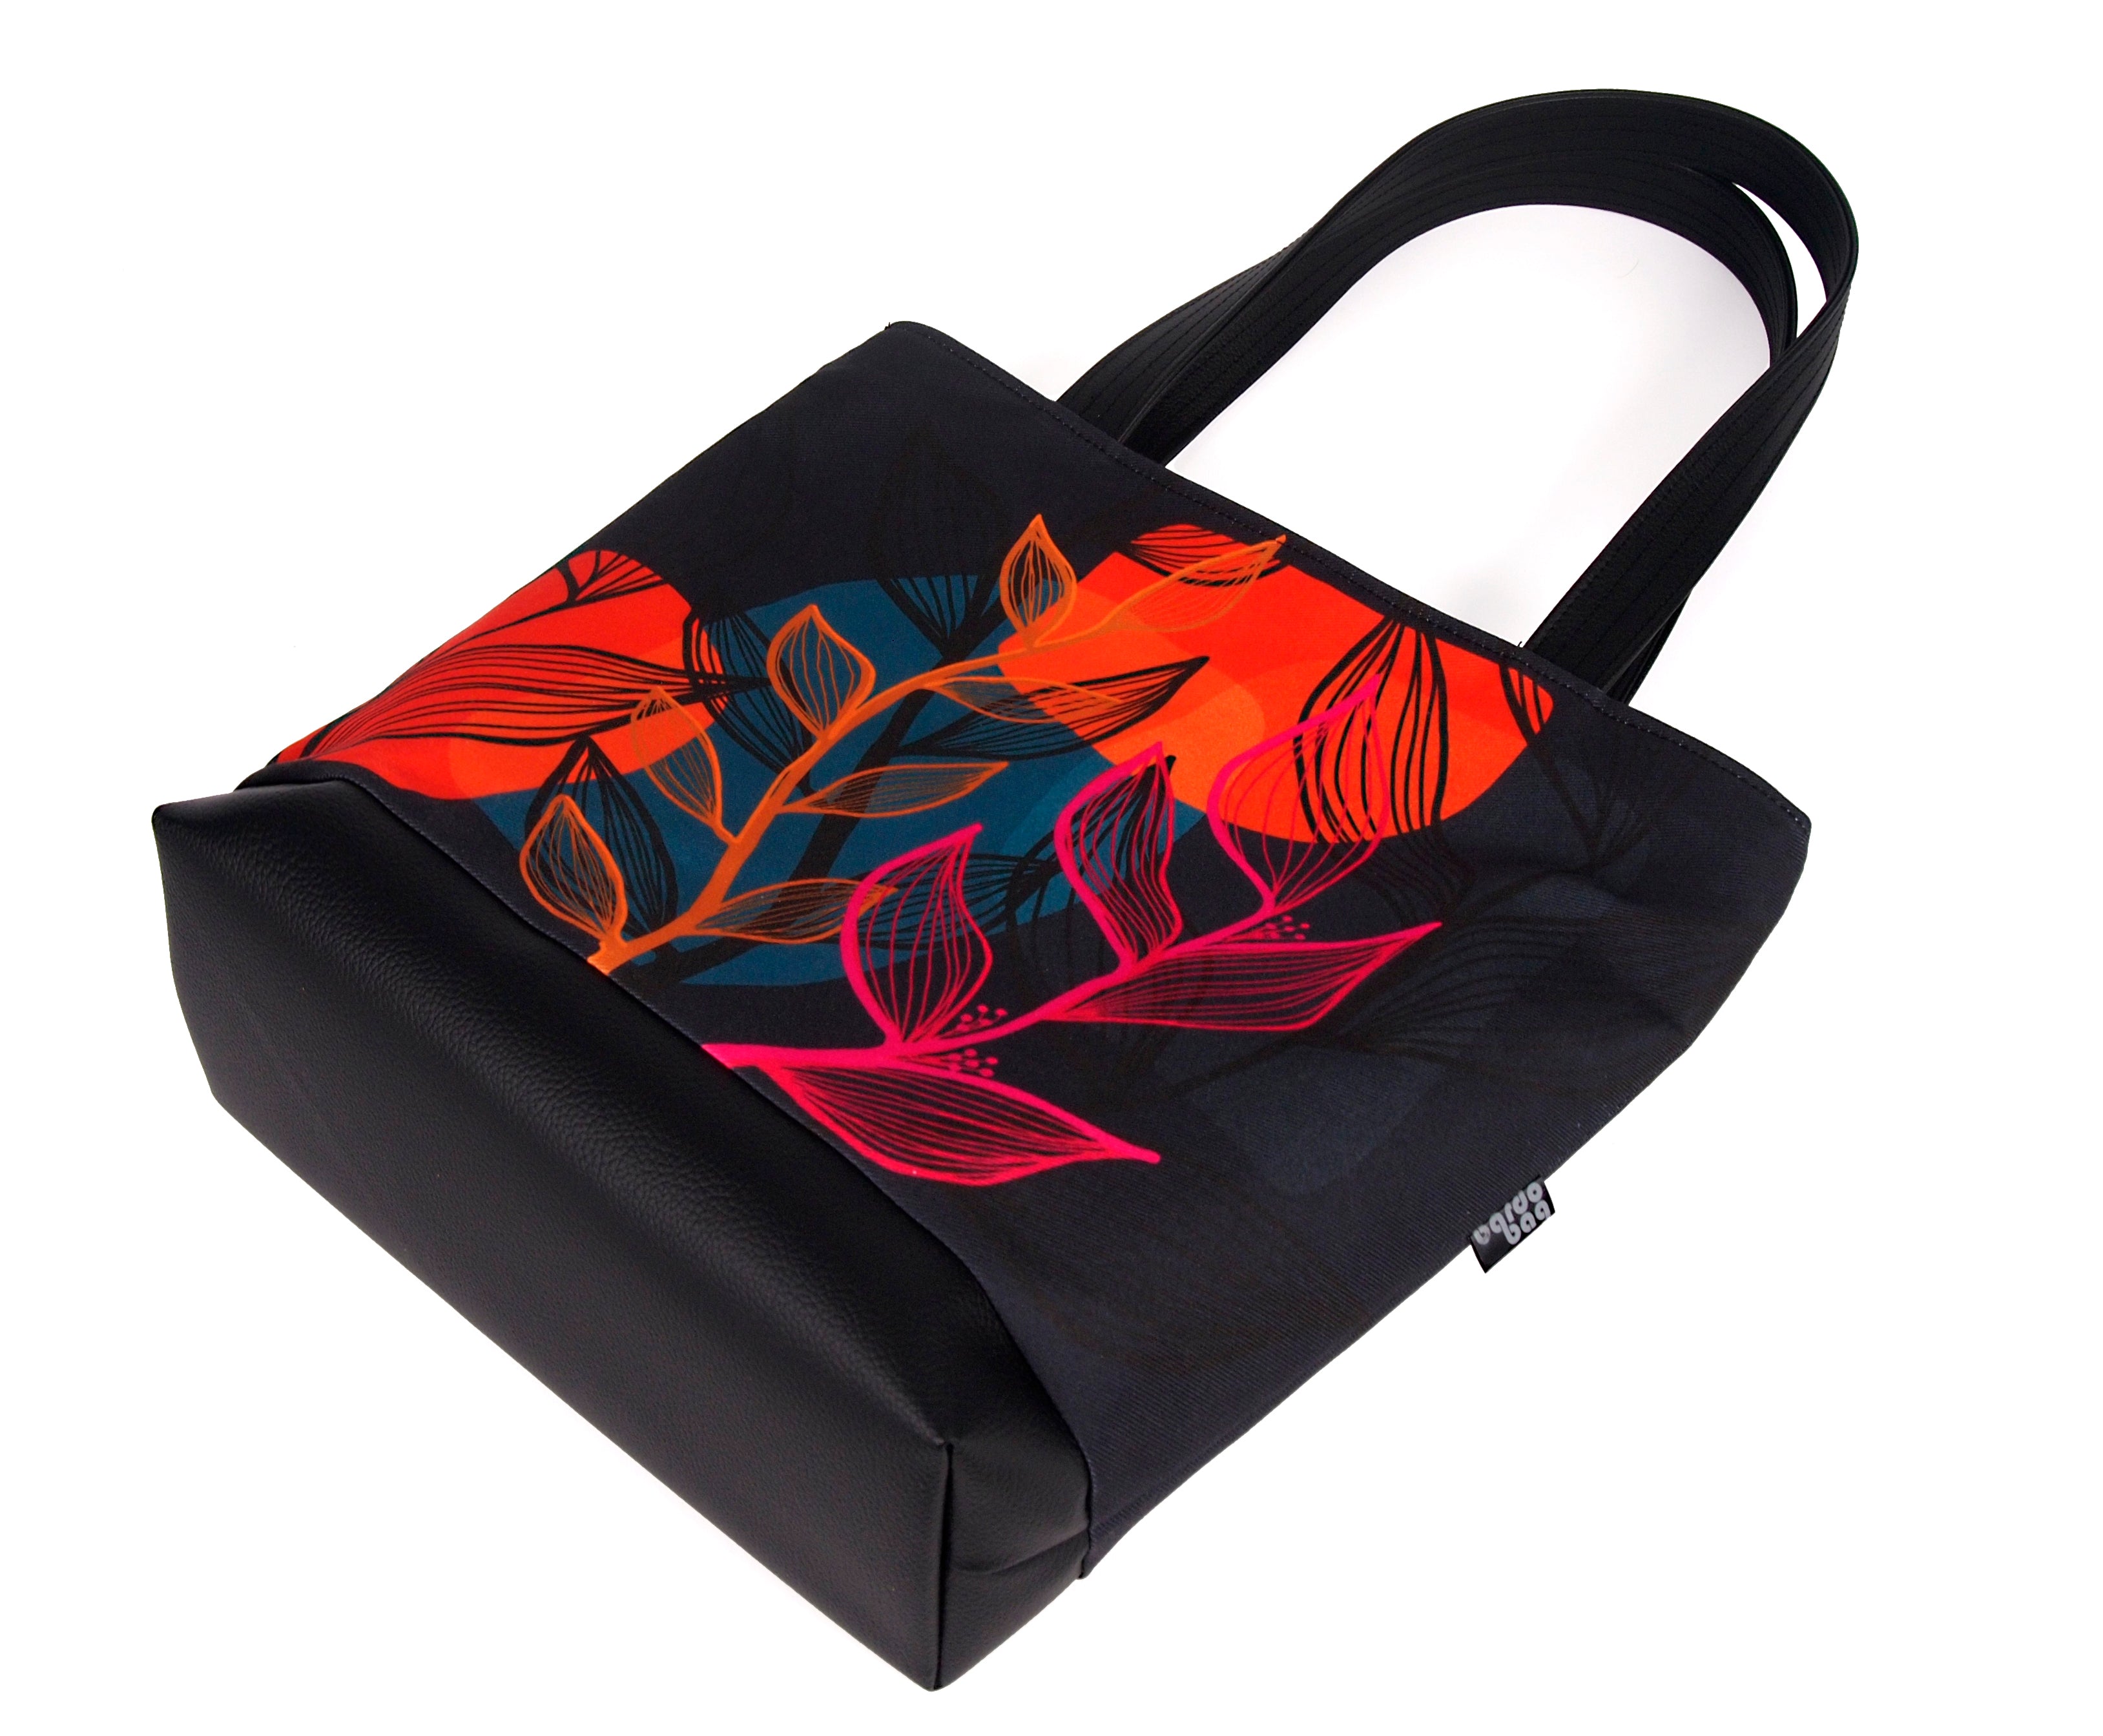 Bardo large tote bag - Summer night - Premium large tote bag from Bardo bag - Just lvabstract, art bag, black, floral, flower, geometric abstraction, gift, green, handemade, large, nature, pink, purple, red, tablet, tote bag, vegan leather, woman, work bag89.00! Shop now at BARDO ART WORKS